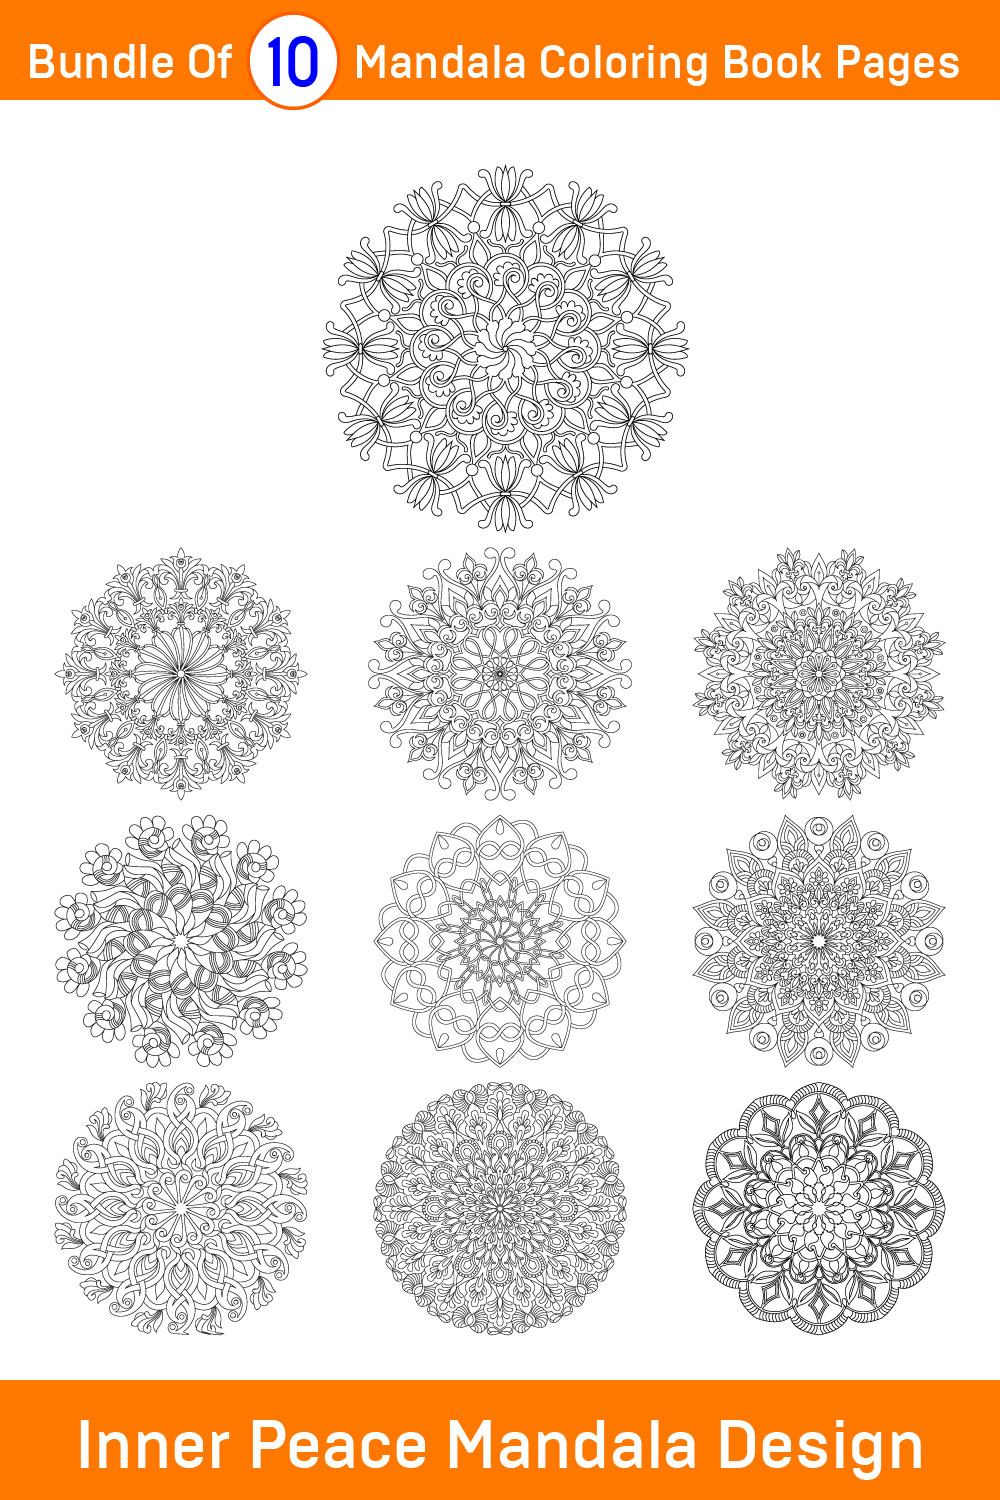 Bundle of 10 Inner Peace Mandala Coloring Book Pages pinterest preview image.